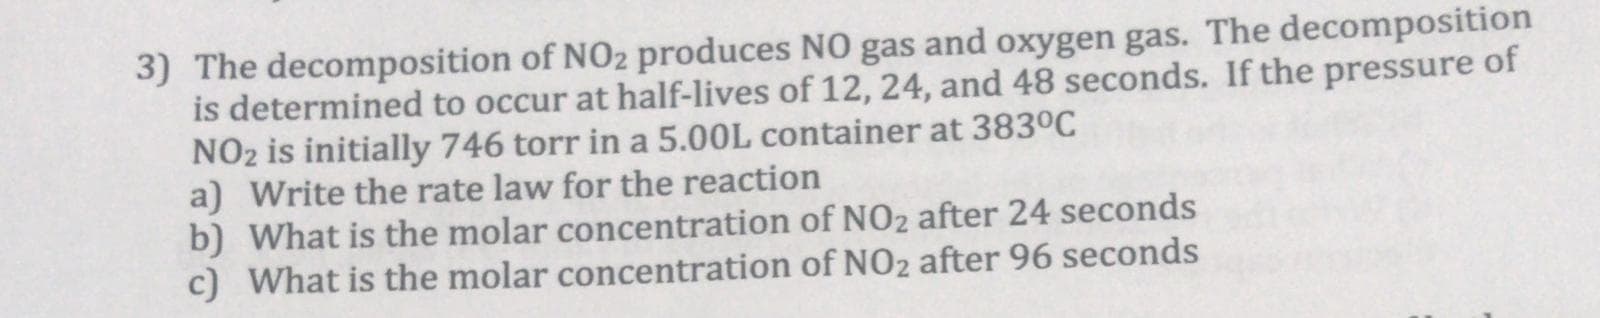 3) The decomposition of NO2 produces NO gas and oxygen gas. The decomposition
is determined to occur at half-lives of 12, 24, and 48 seconds. If the pressure of
NO2 is initially 746 torr in a 5.00L container at 383°C
a) Write the rate law for the reaction
b) What is the molar concentration of NO2 after 24 seconds
c) What is the molar concentration of NO2 after 96 seconds
